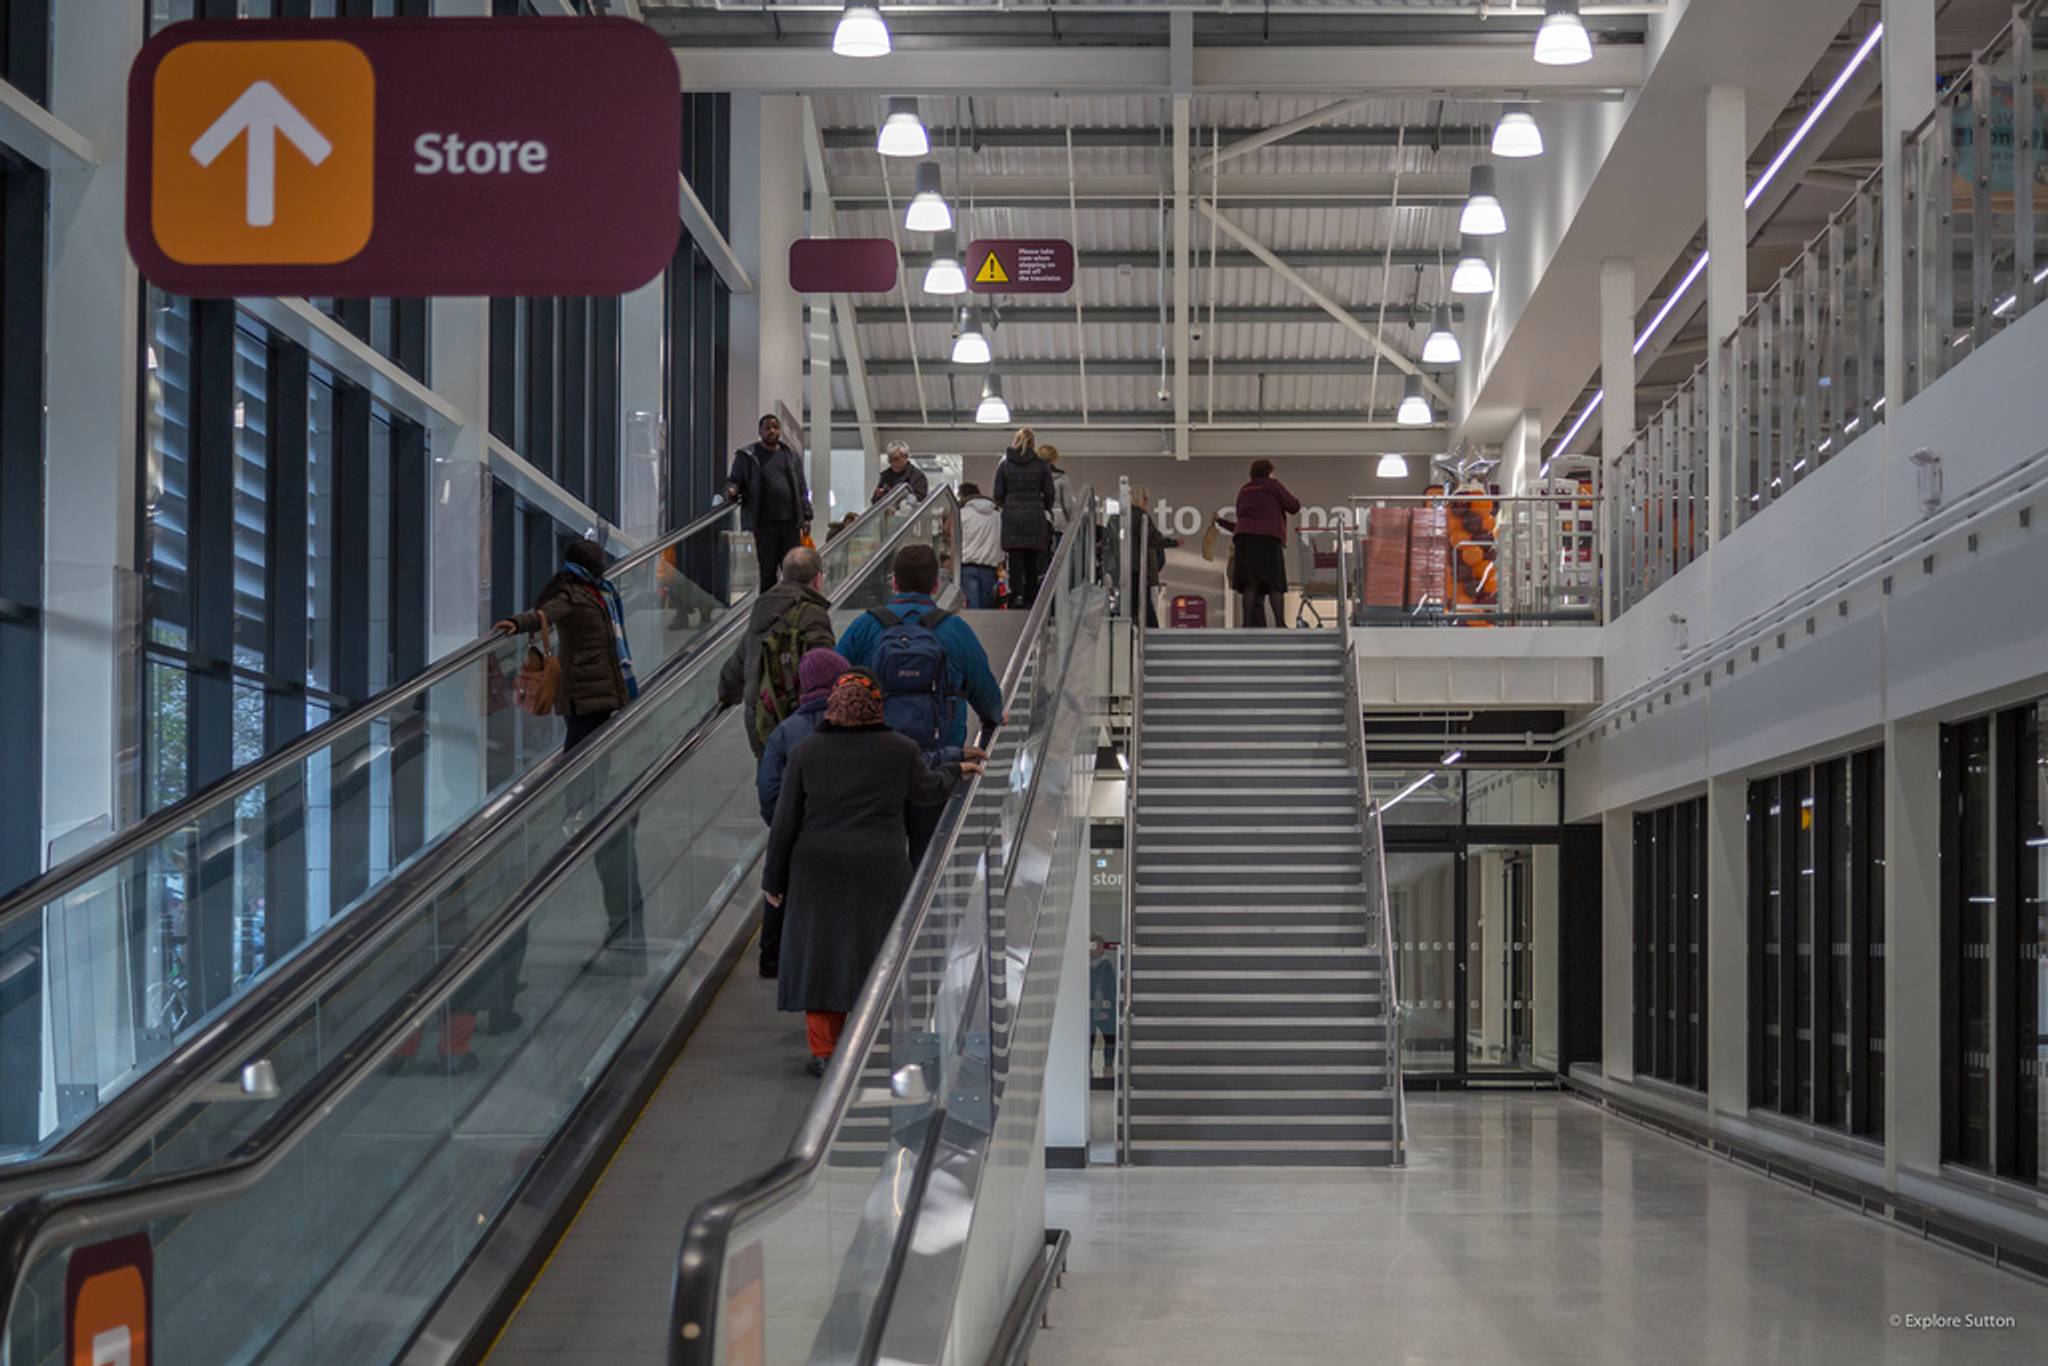 UK supermarkets are trialling surge pricing